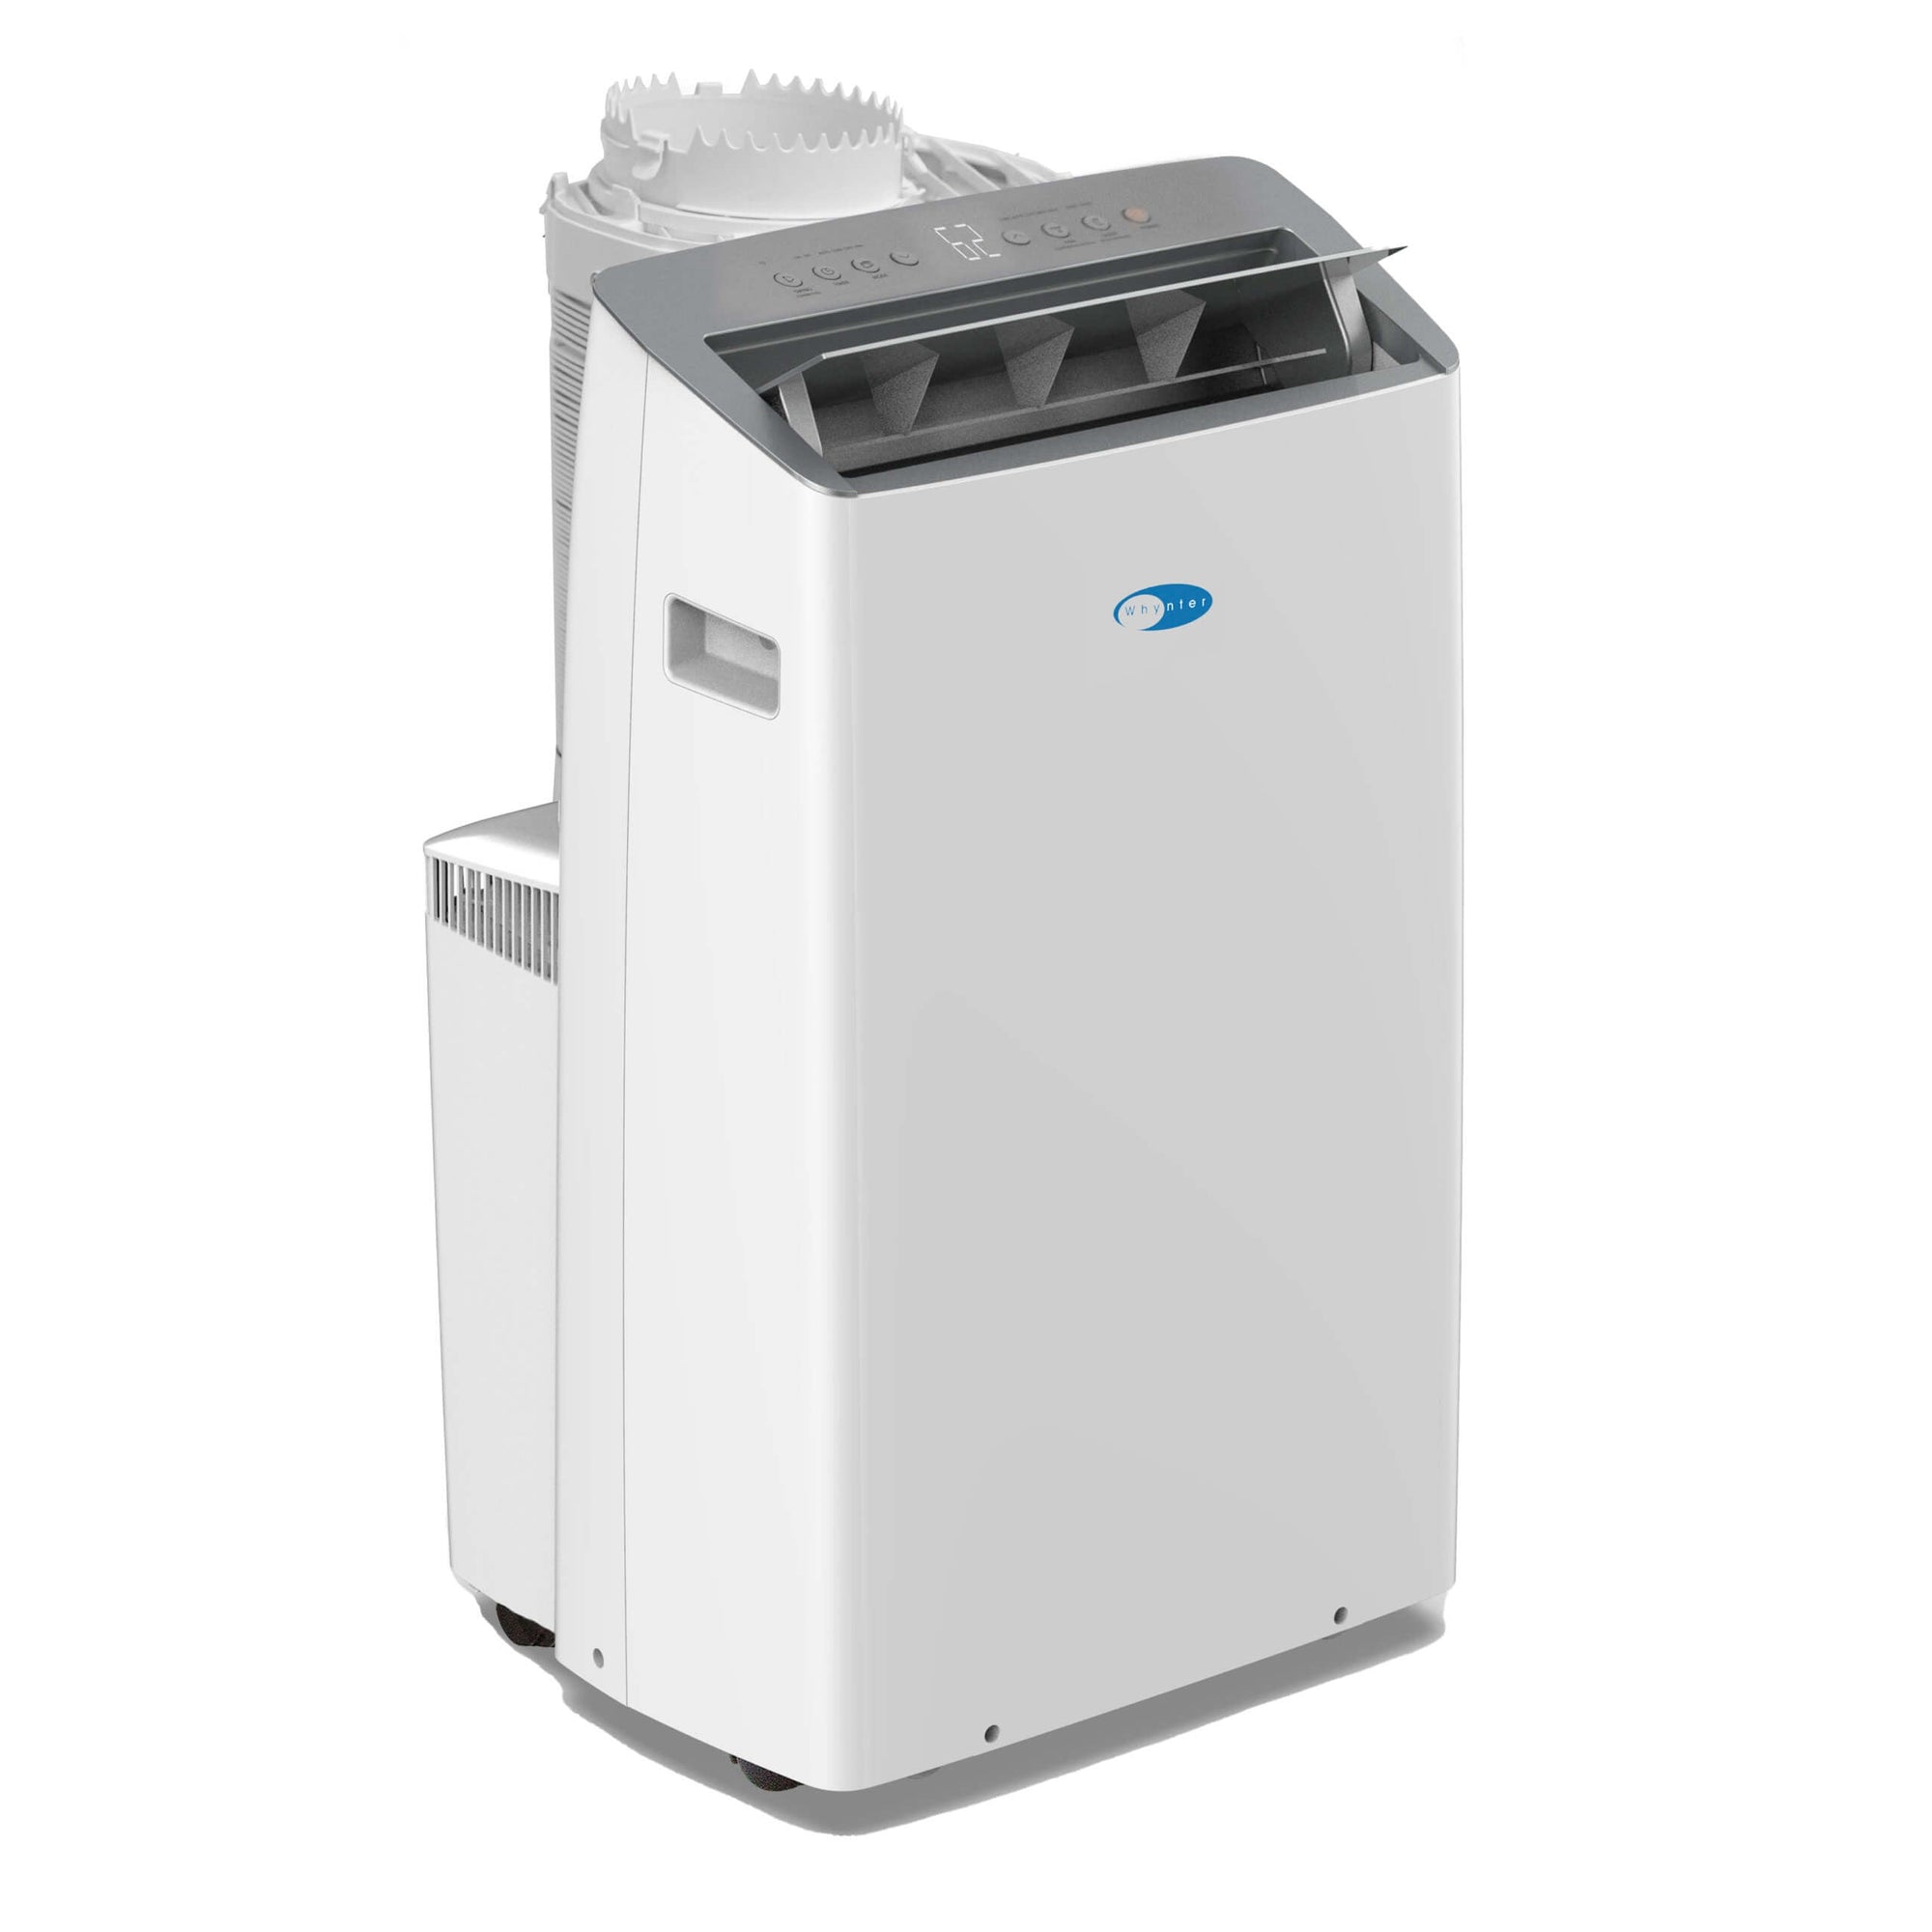 Whynter ARC-1230WN 12,000 BTU SACC in White Inverter Dual Hose Portable Air Conditioner with Smart Wi-Fi New